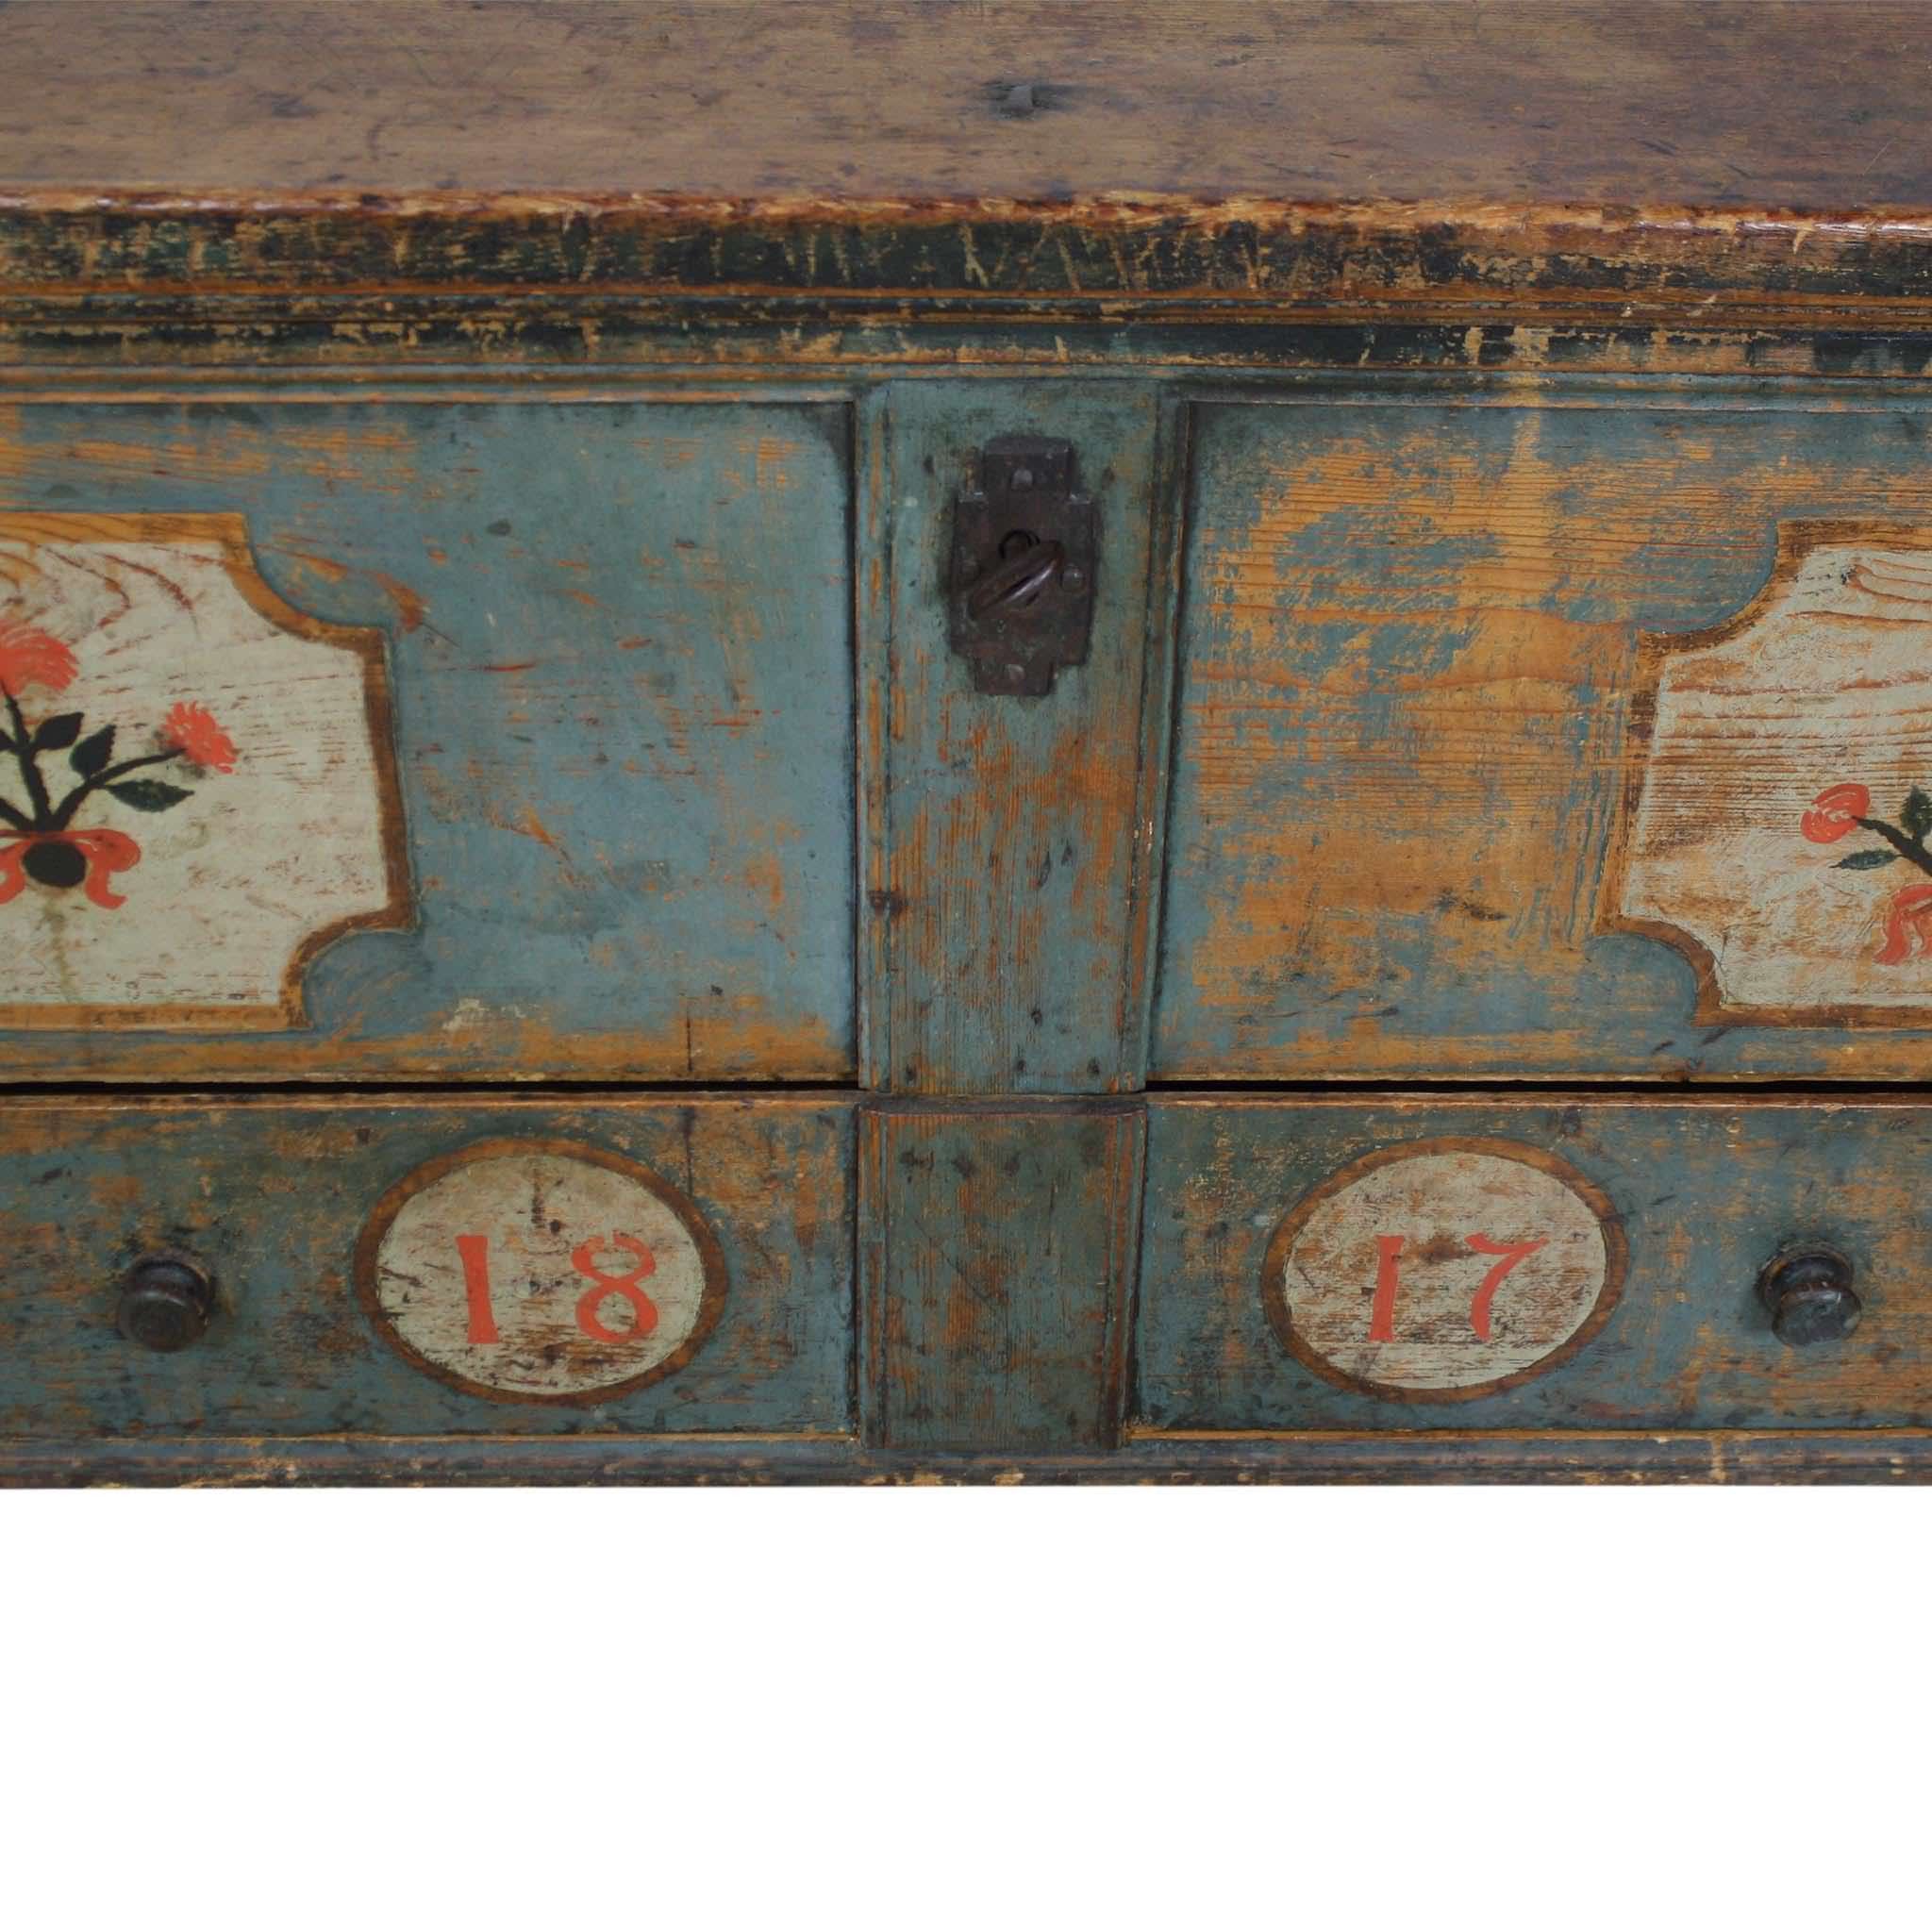 Large Painted Trunk with Drawer